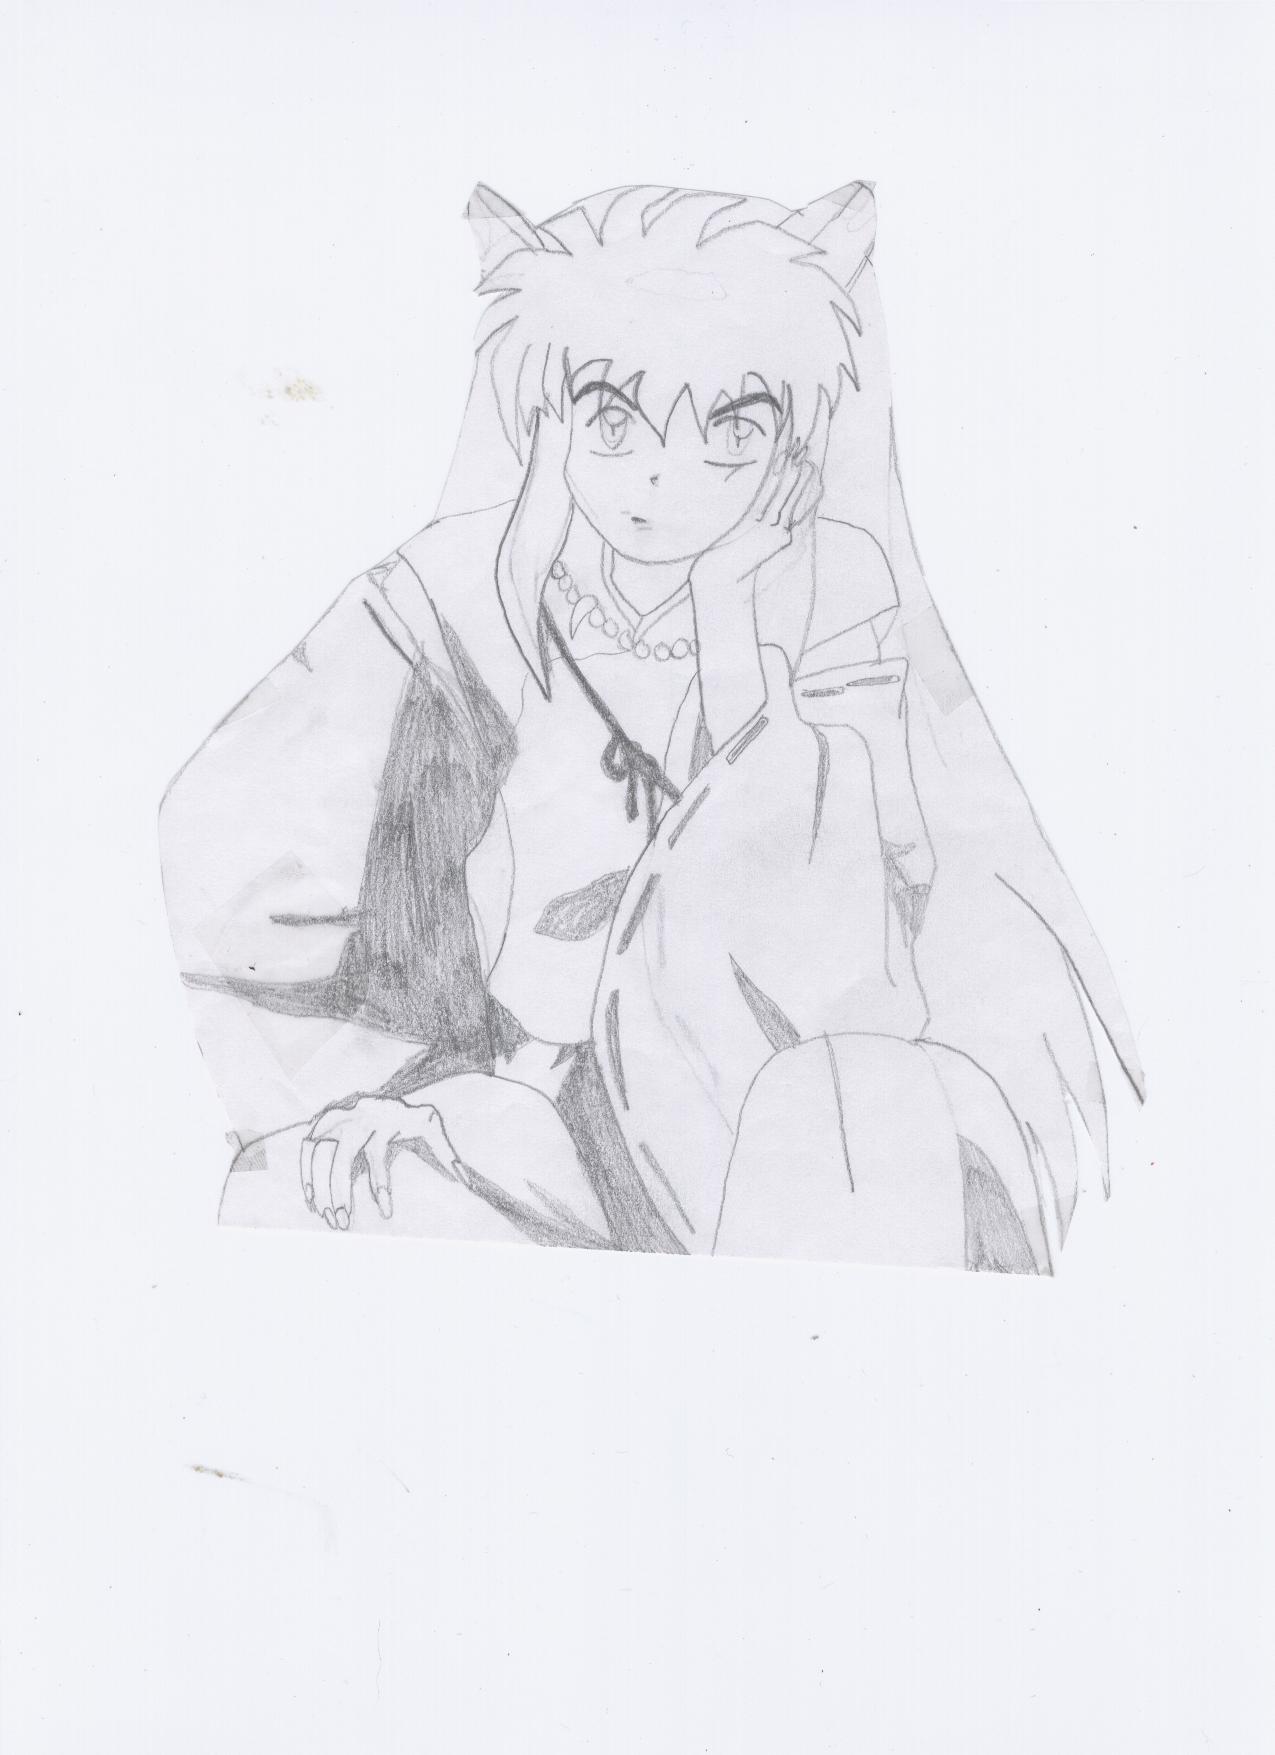 Pouting Inuyasha by musicfreak1389